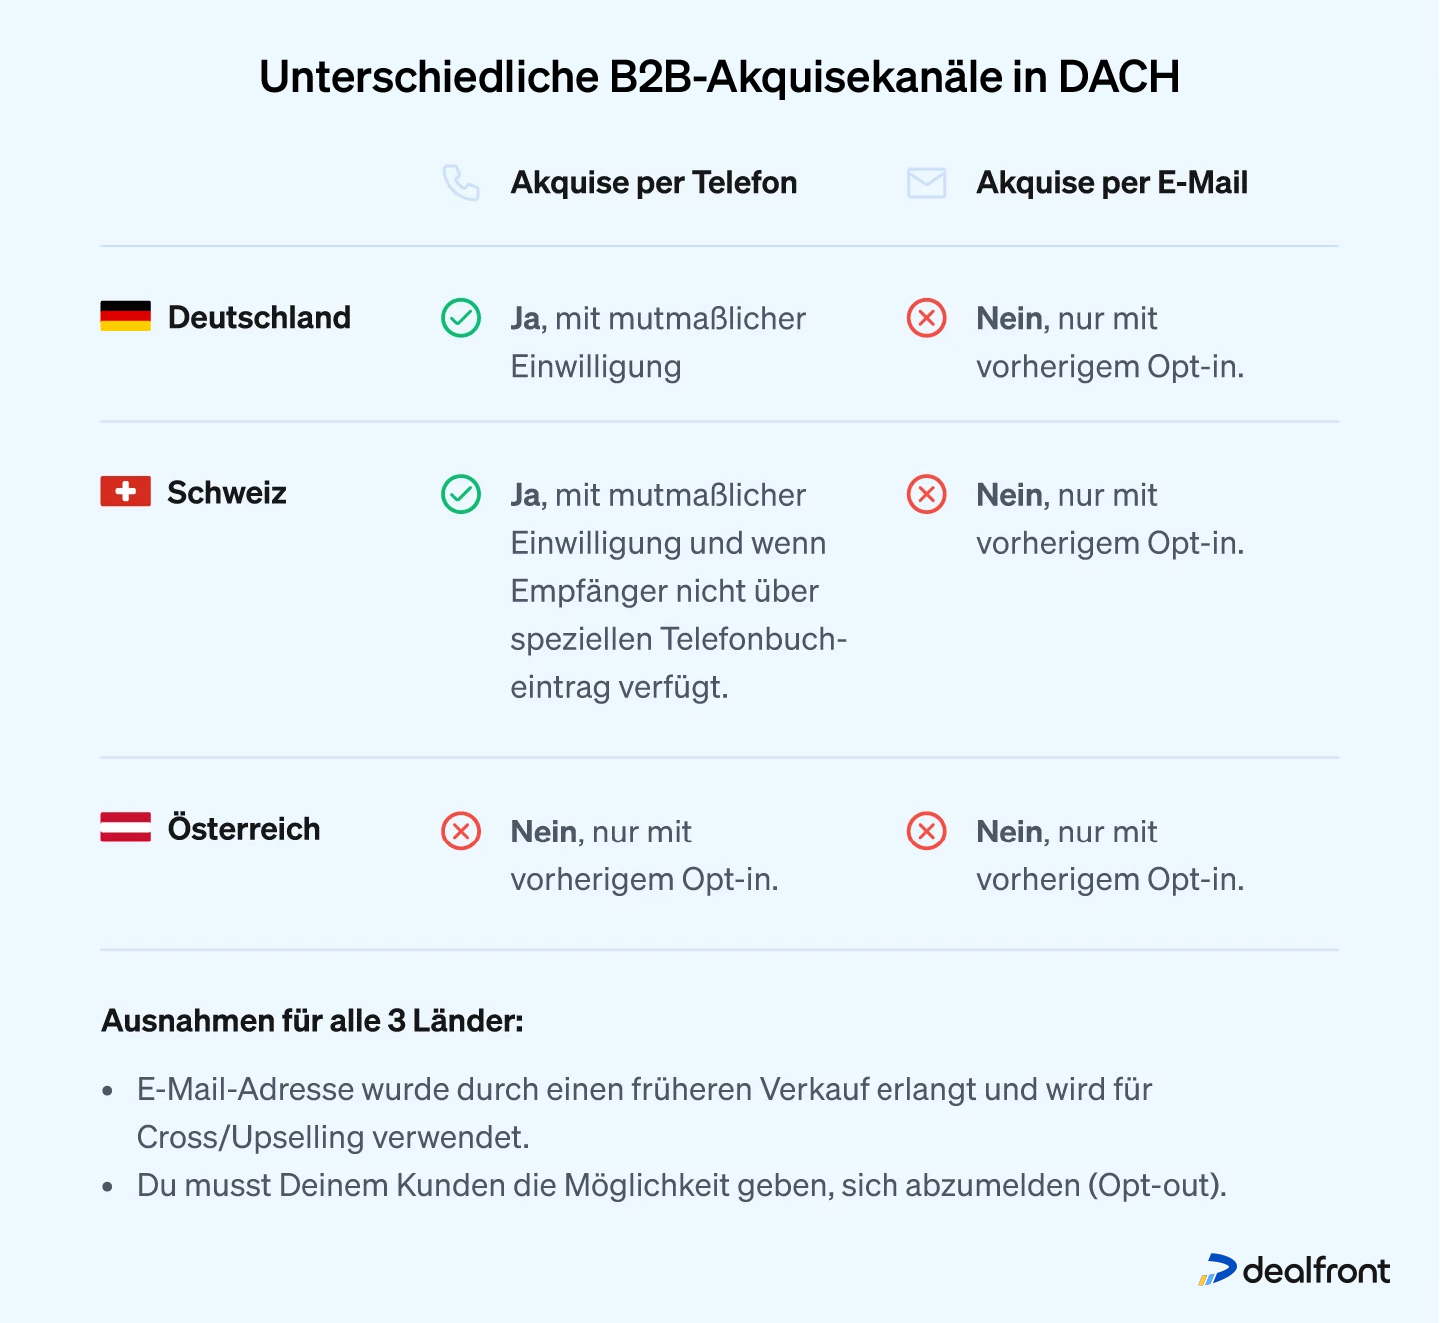 Different B2B acquisition channels in DACH